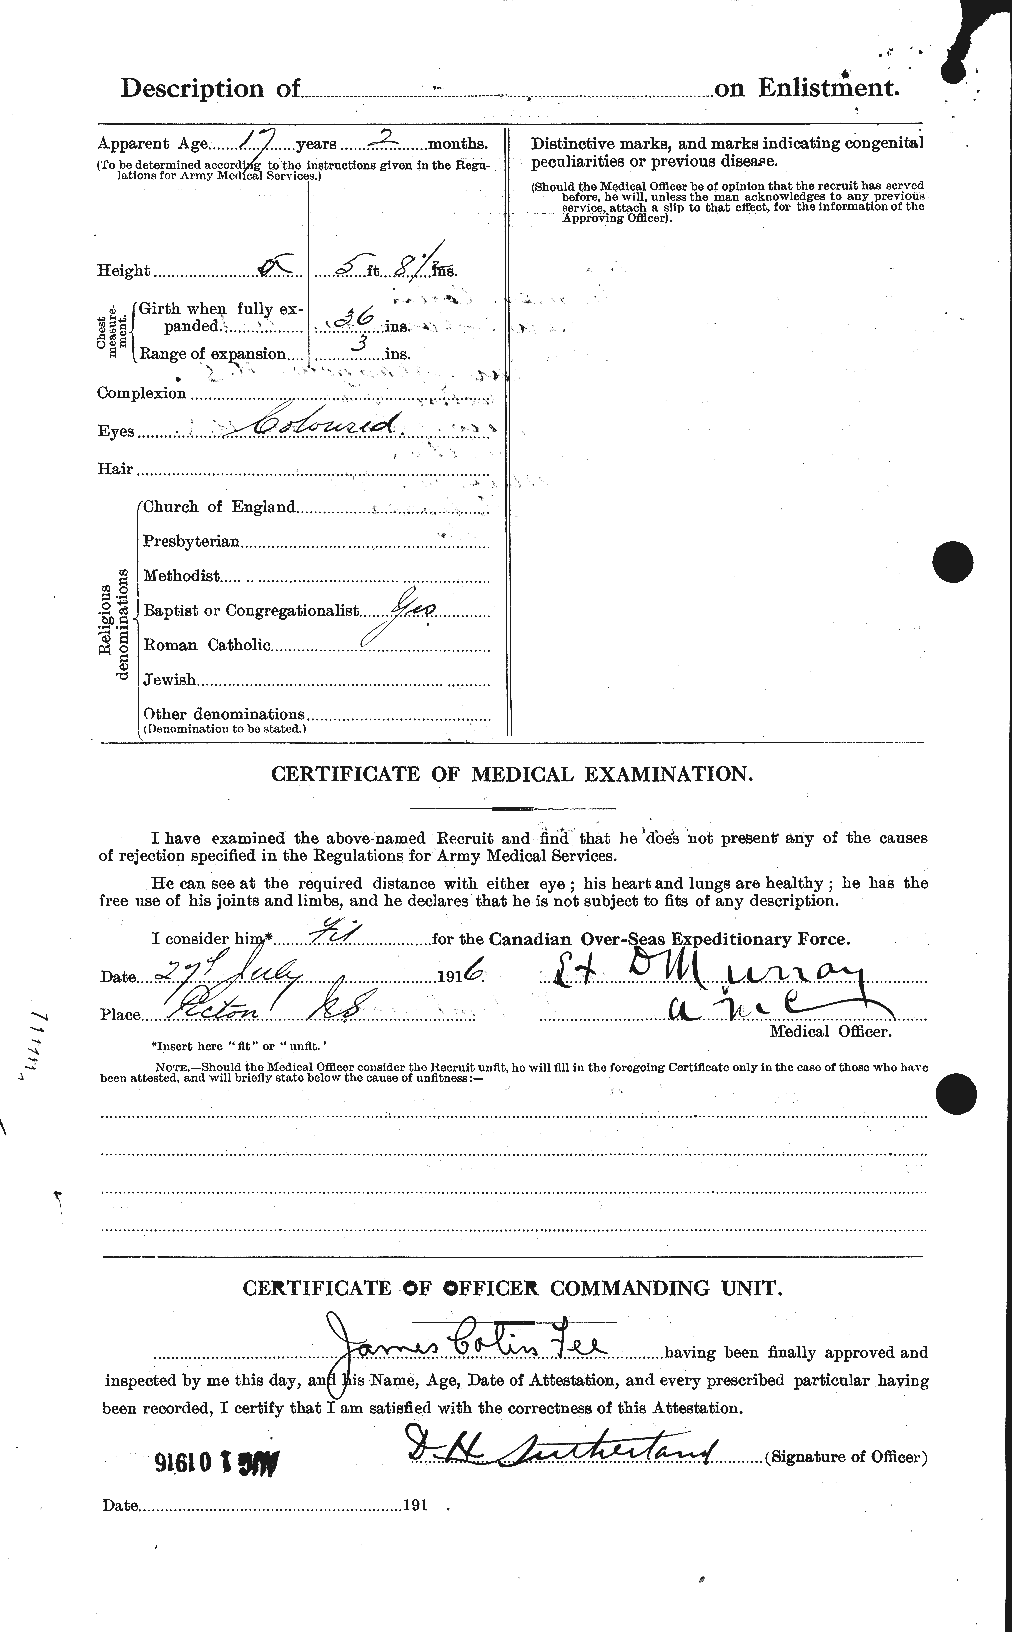 Personnel Records of the First World War - CEF 321505b